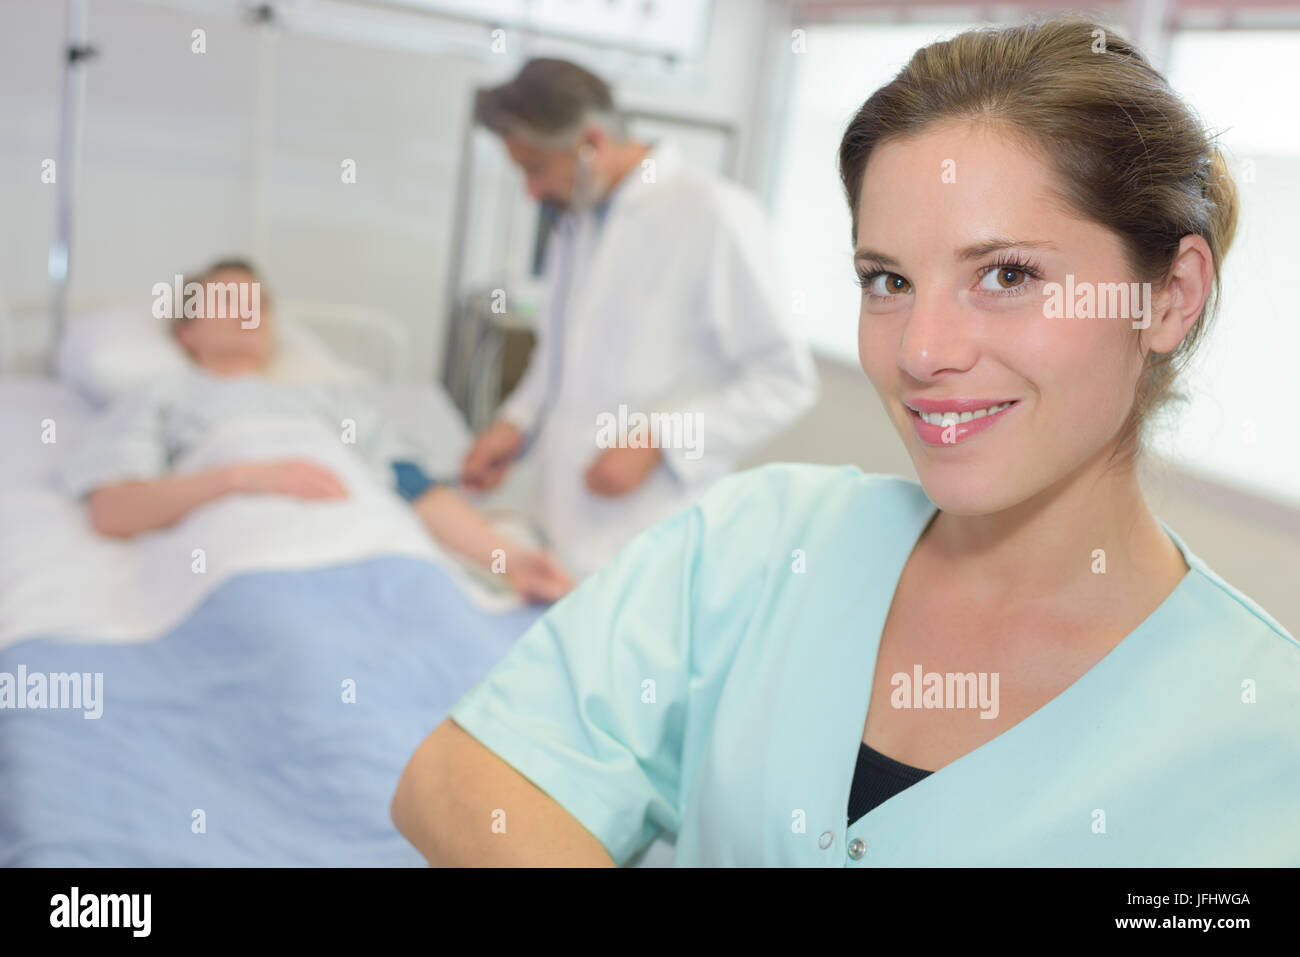 Portrait of nurse, patient in hospital bed in the background Stock Photo